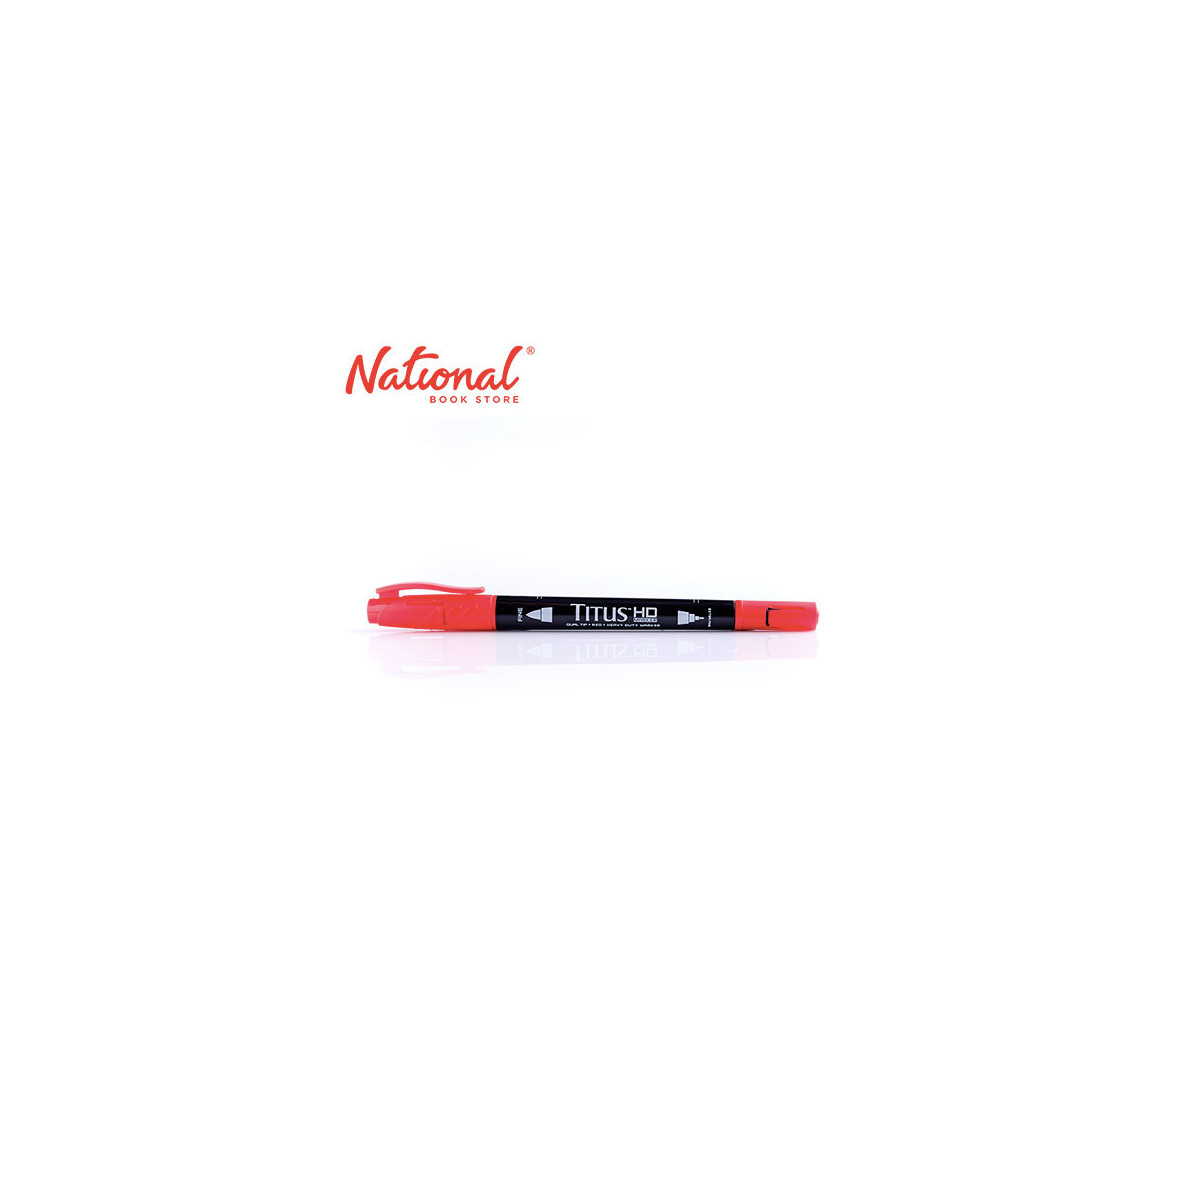 Titus HD Dual Tip Permanent Marker Red 04015294 - School & Office Supplies